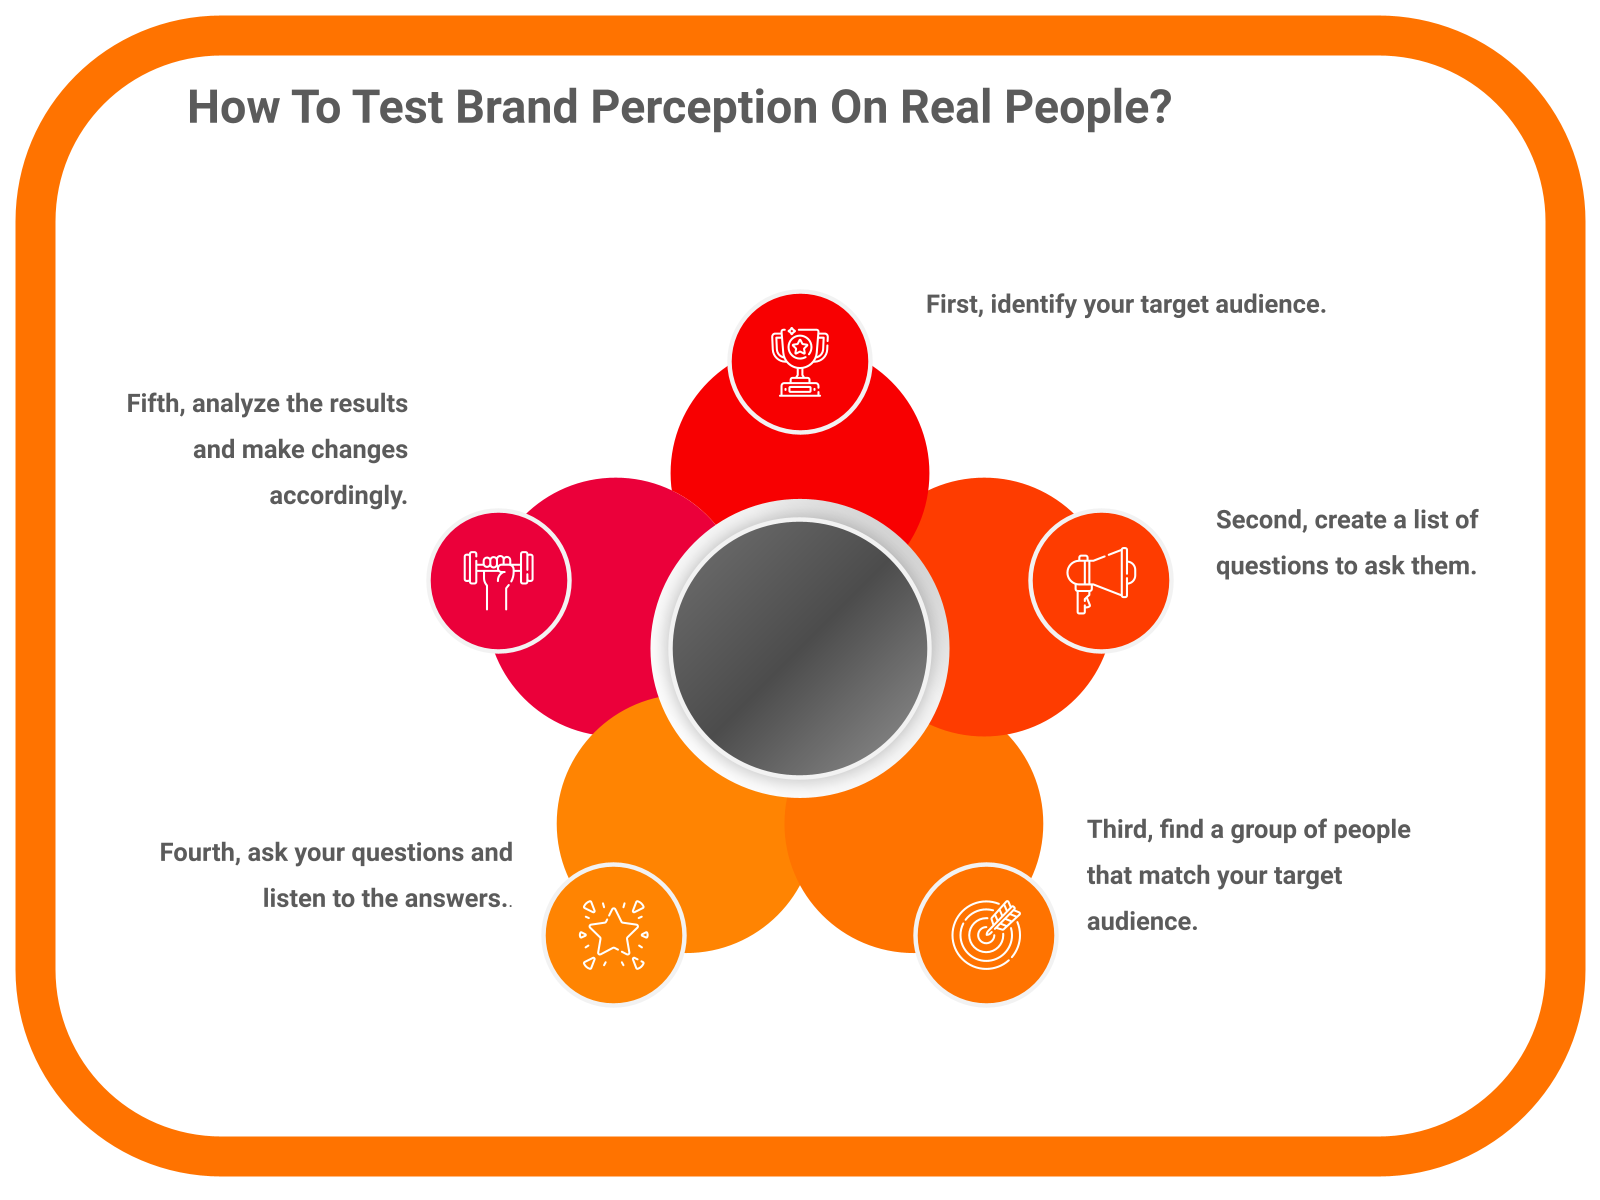 How To Test Brand Perception On Real People?